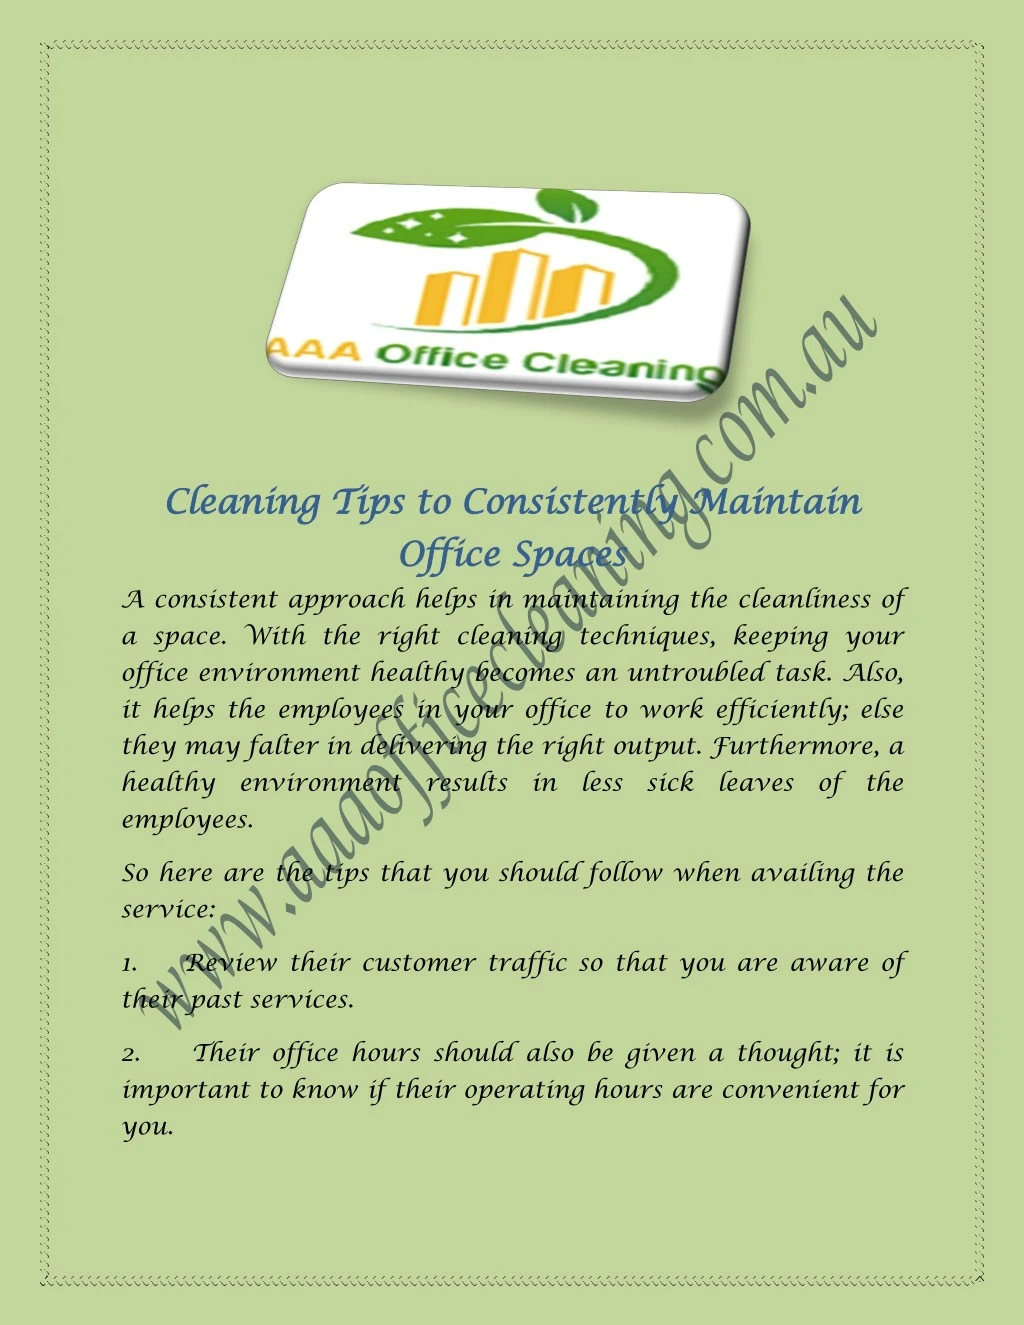 cleaning tips to consistently maintain cleaning